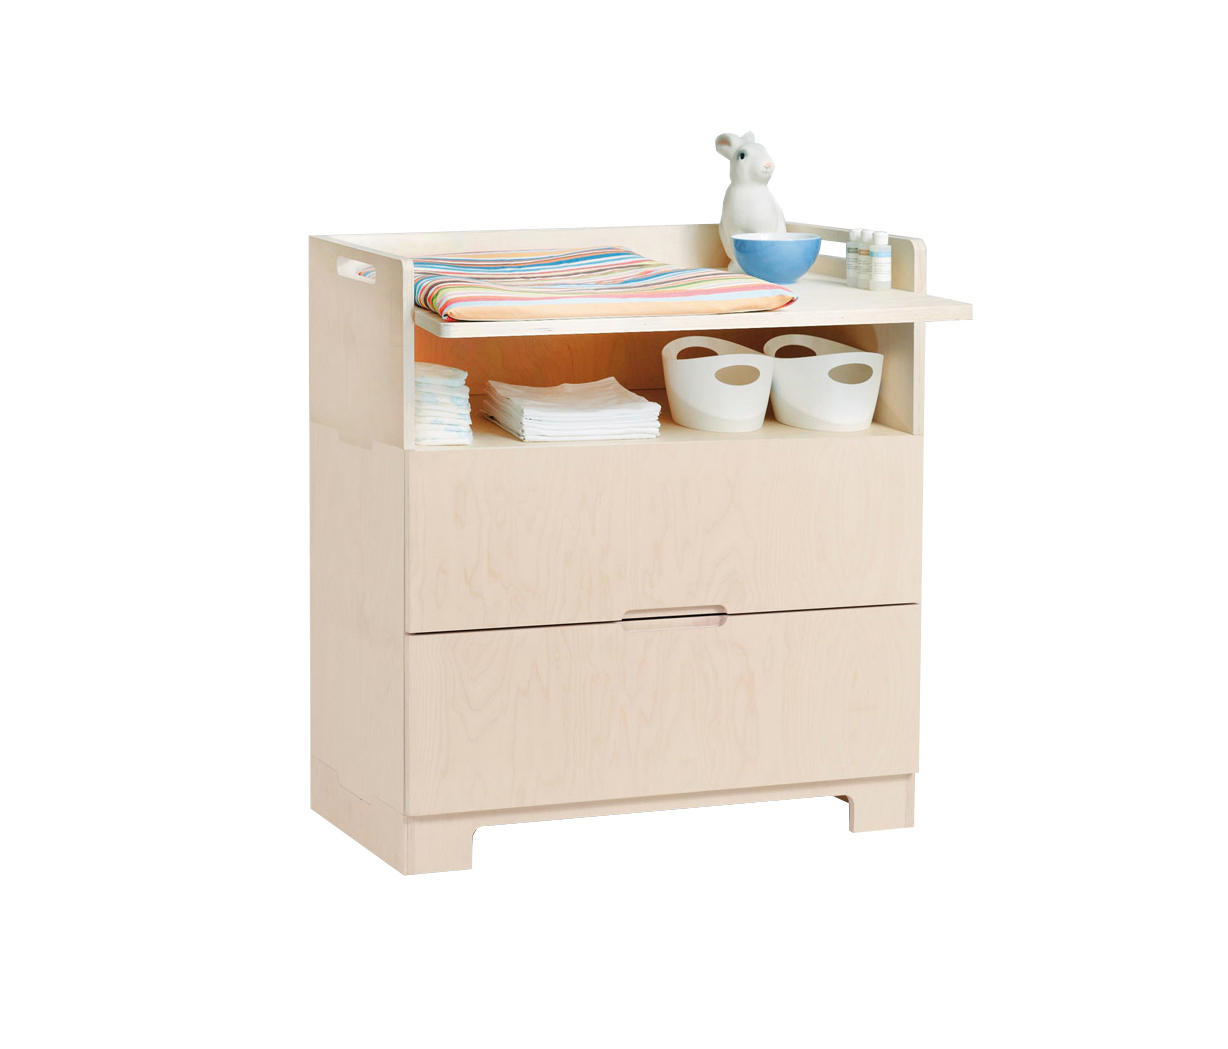 Changing Table High Quality Designer Products Architonic